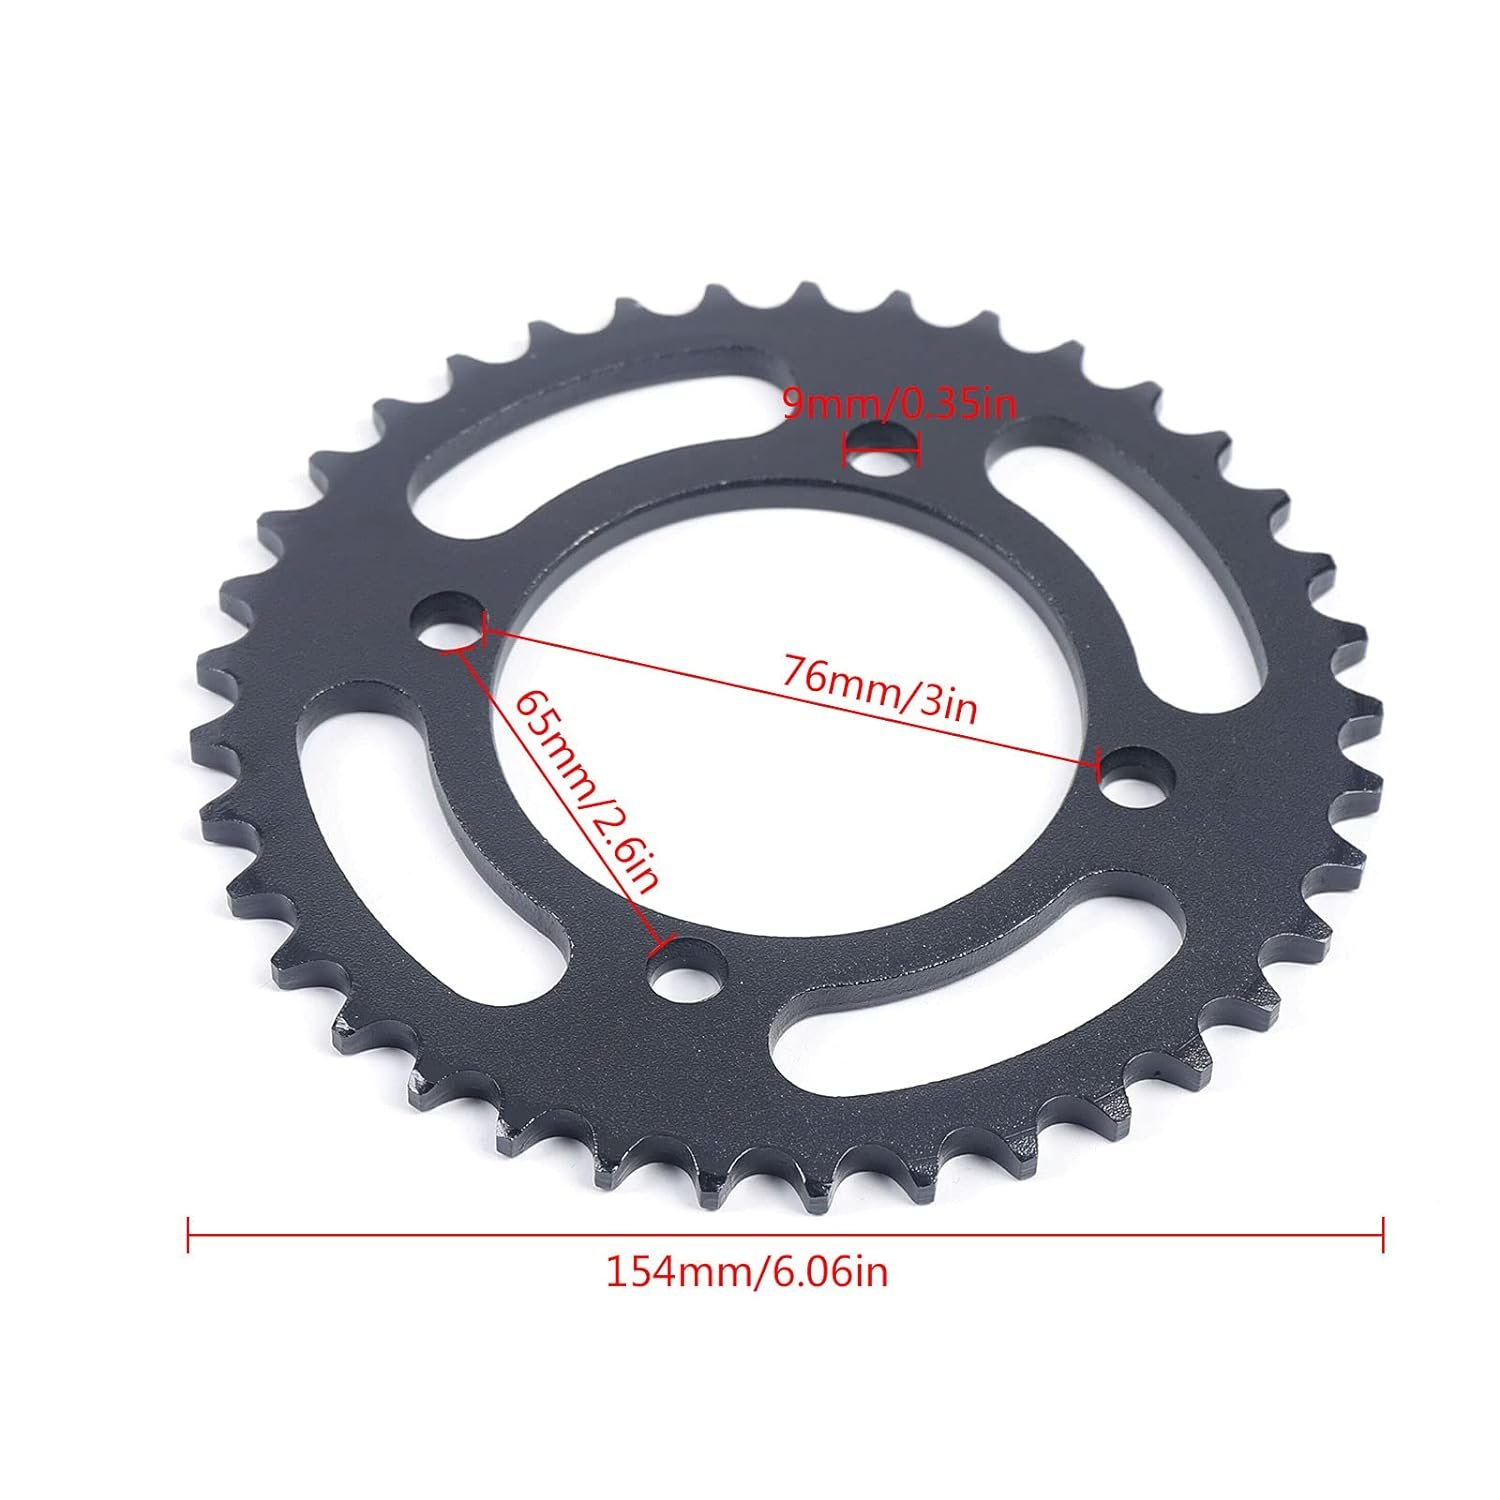 420 Chain & Front Rear Sprocket Review